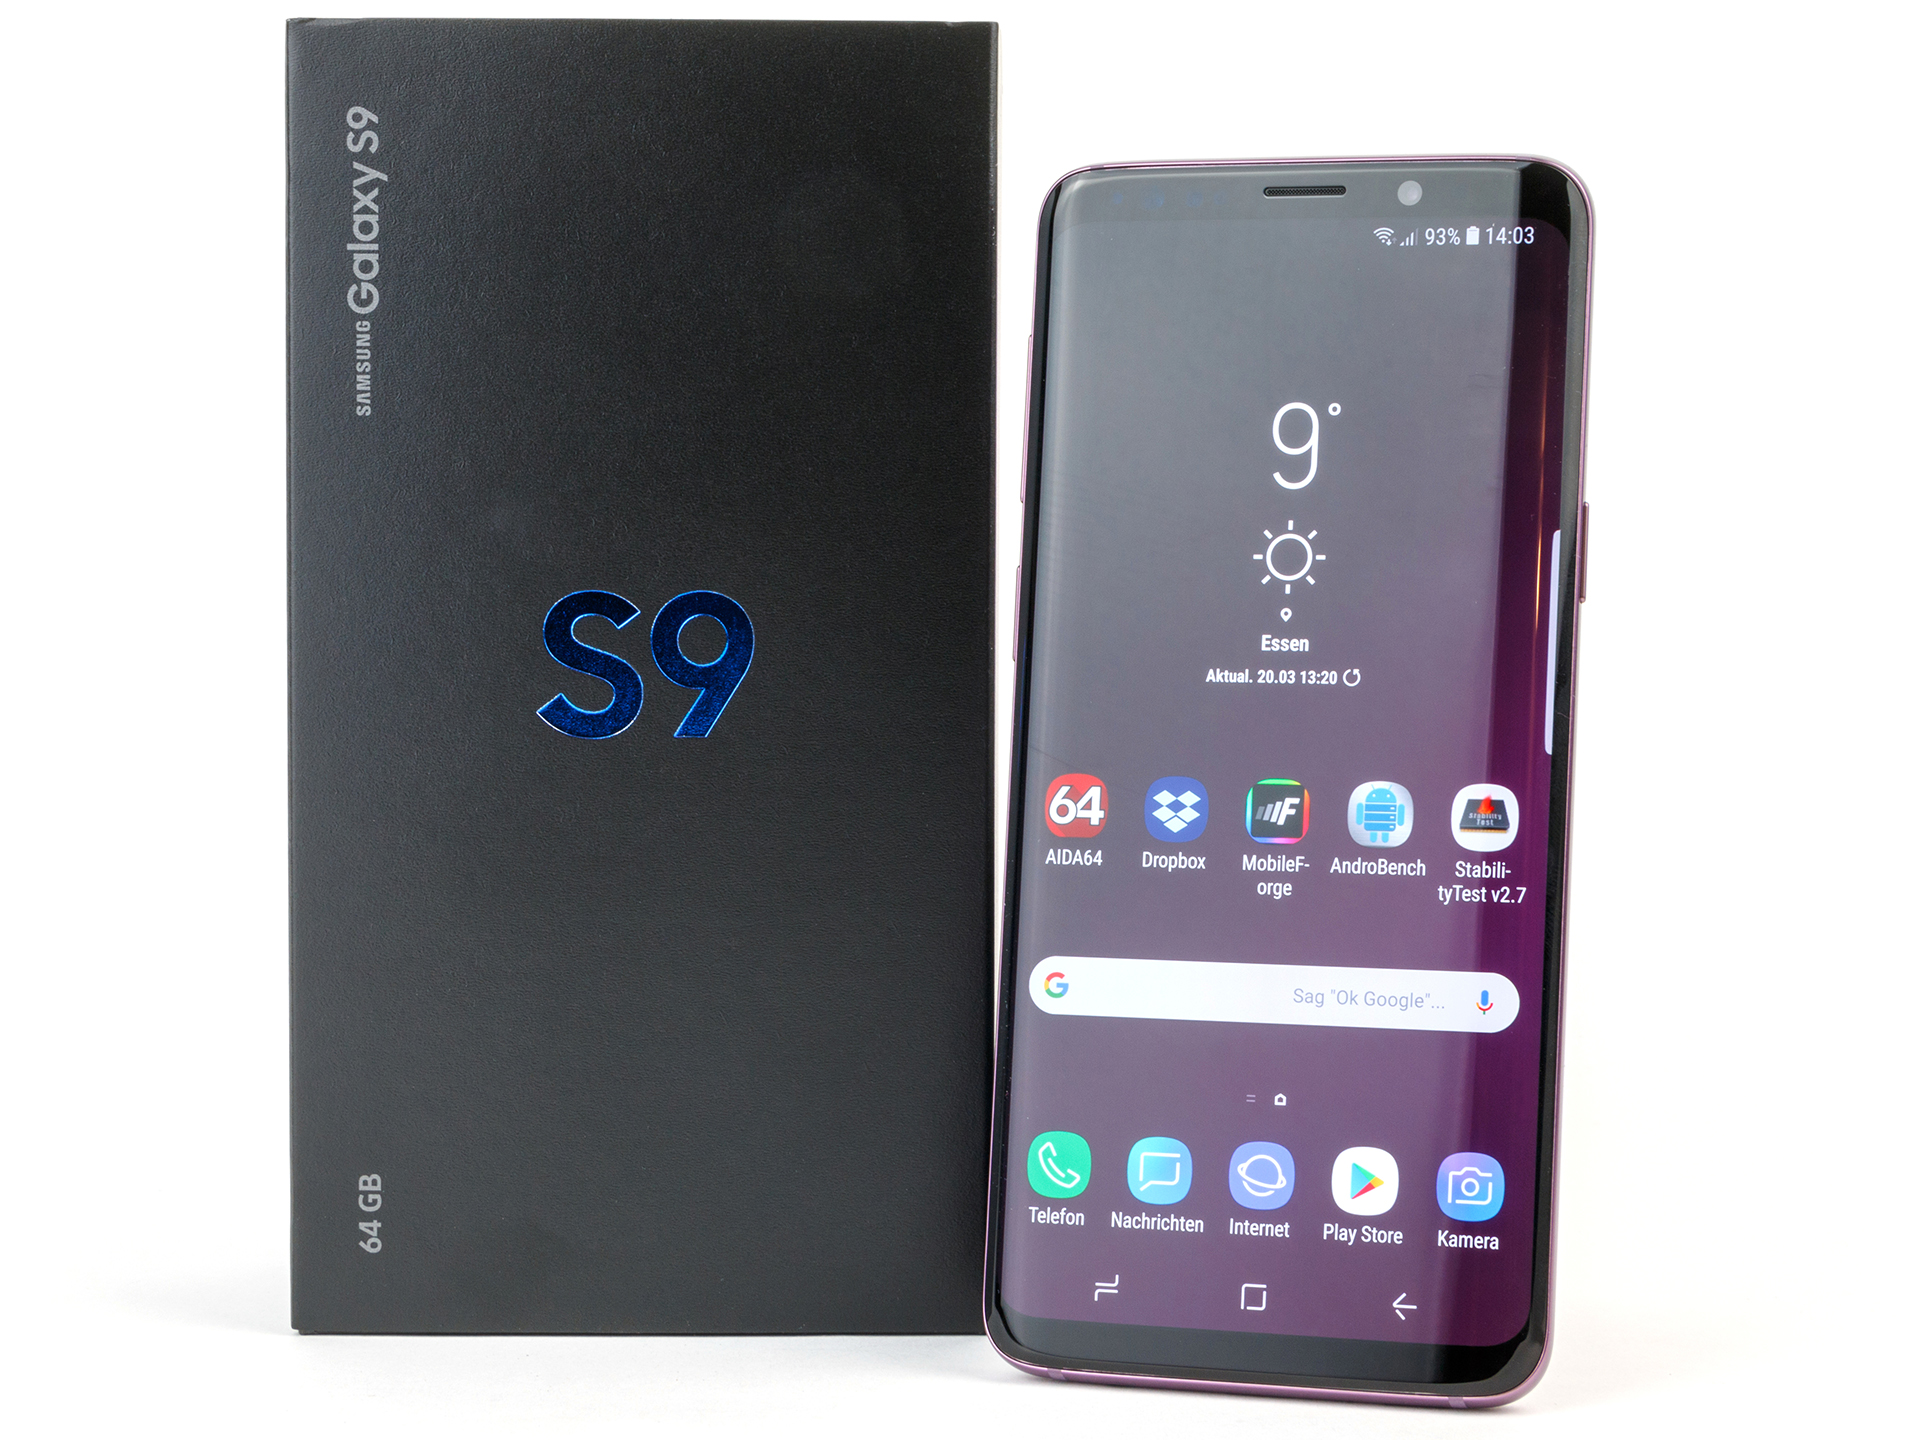 Samsung Galaxy S9 Smartphone Review